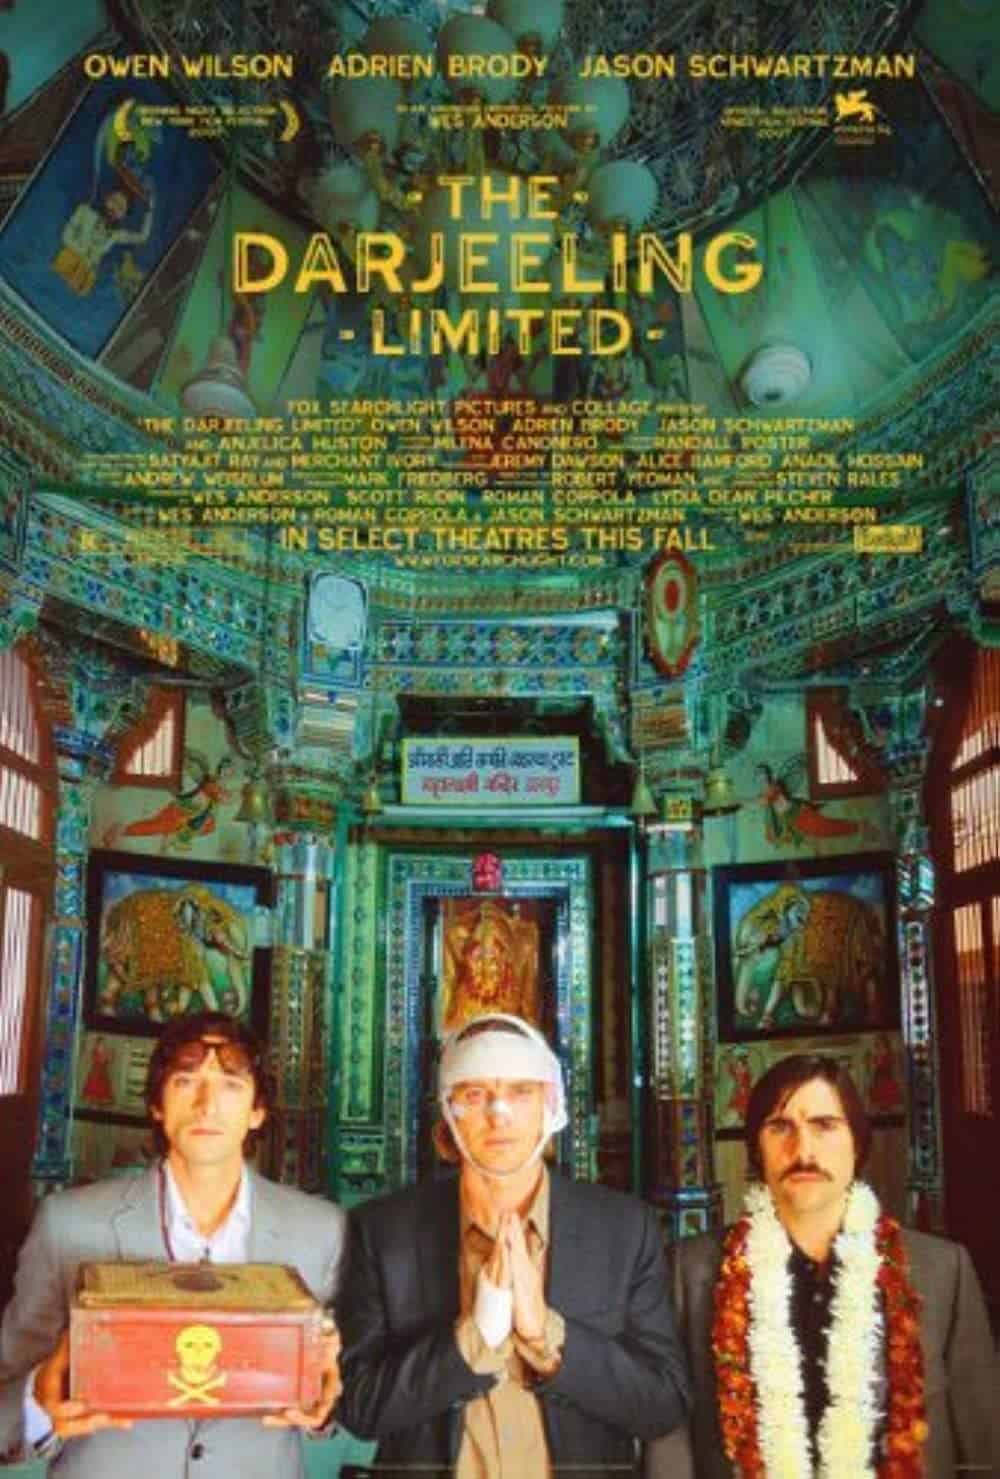 The Darjeeling Limited (2007) Best Train Movies You Can't Miss